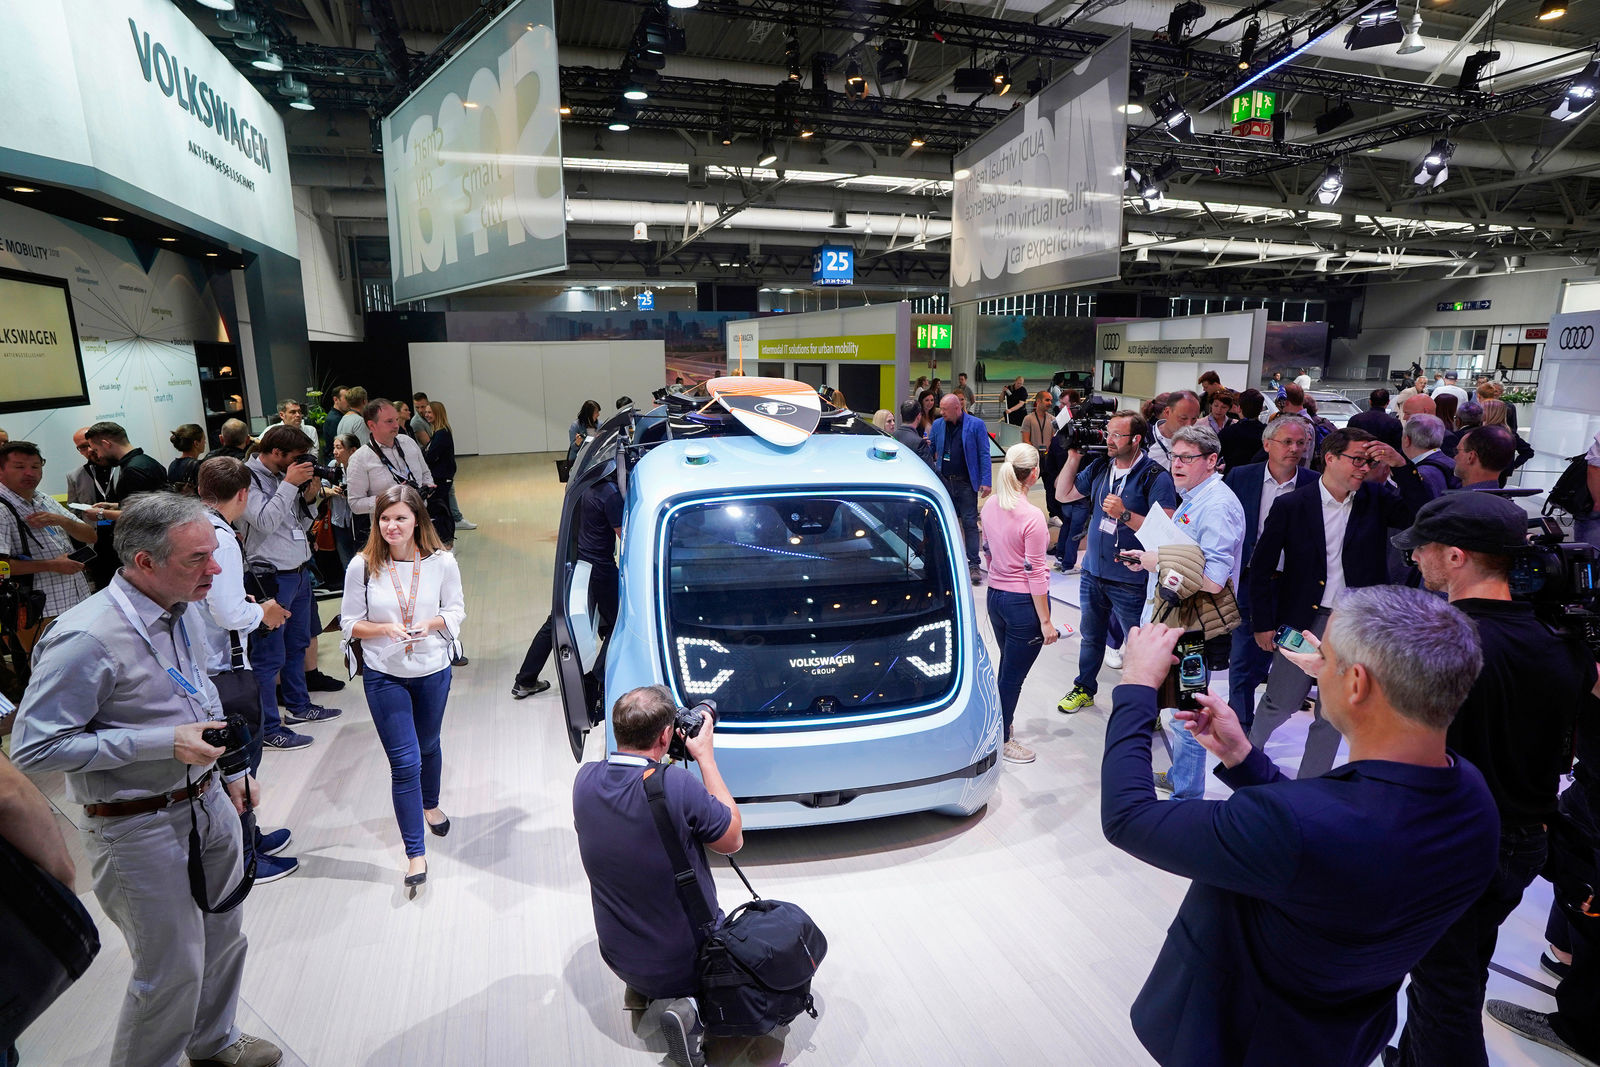 CEBIT 2018 highlights: Volkswagen provides glimpses of digital know-how and presents the latest variant of the SEDRIC